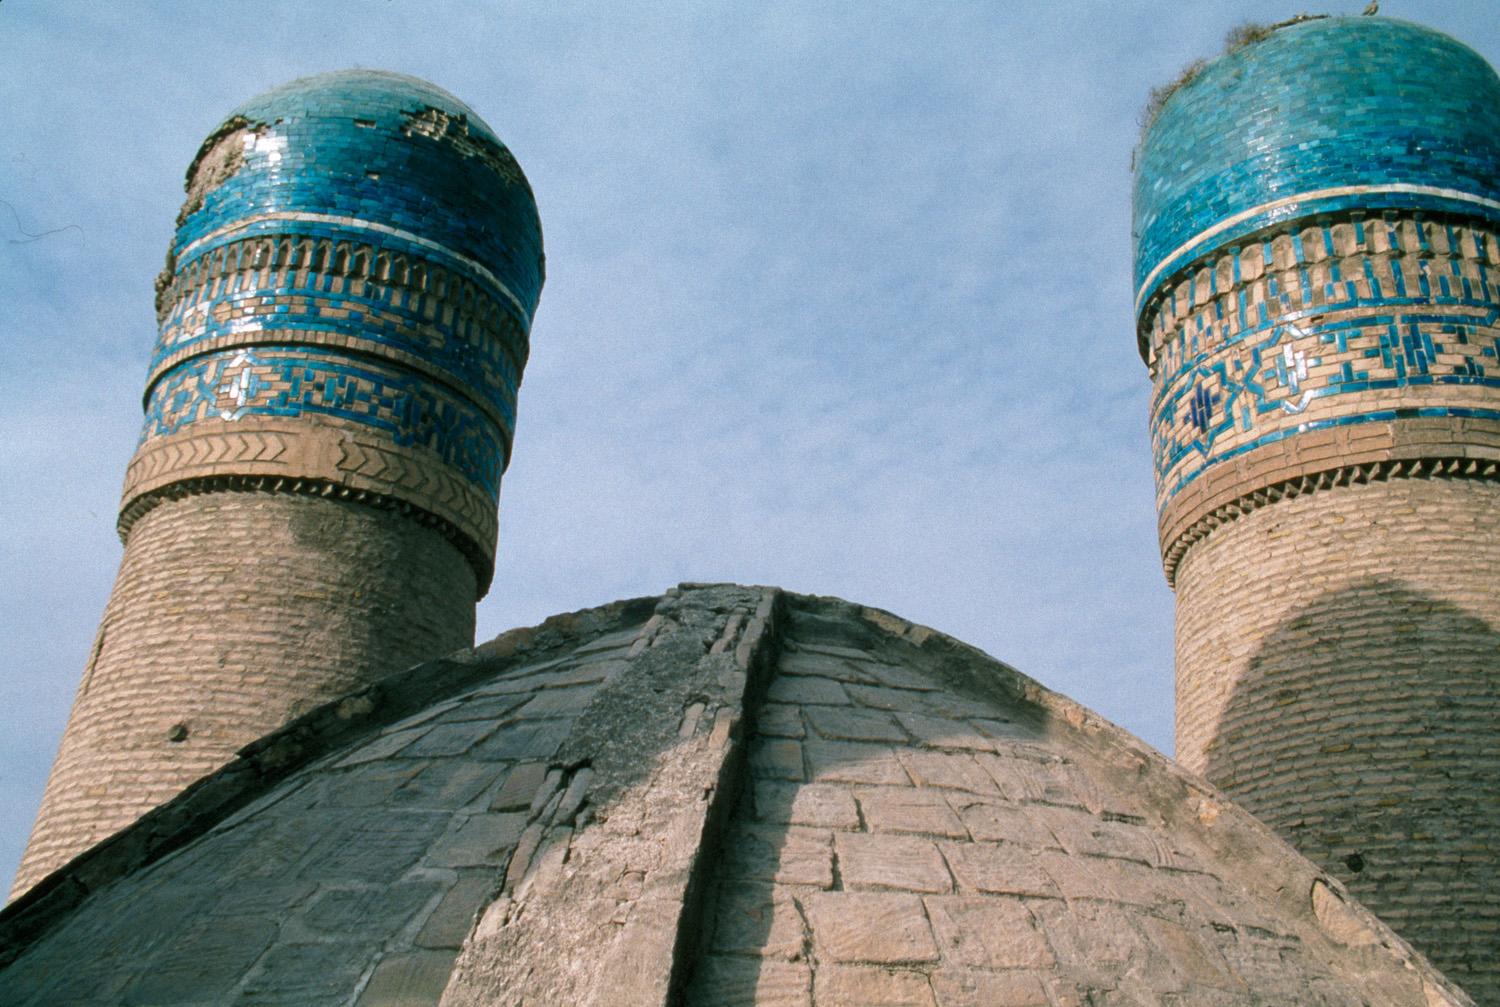 Chor Minor - Detail view of the dome and two minarets